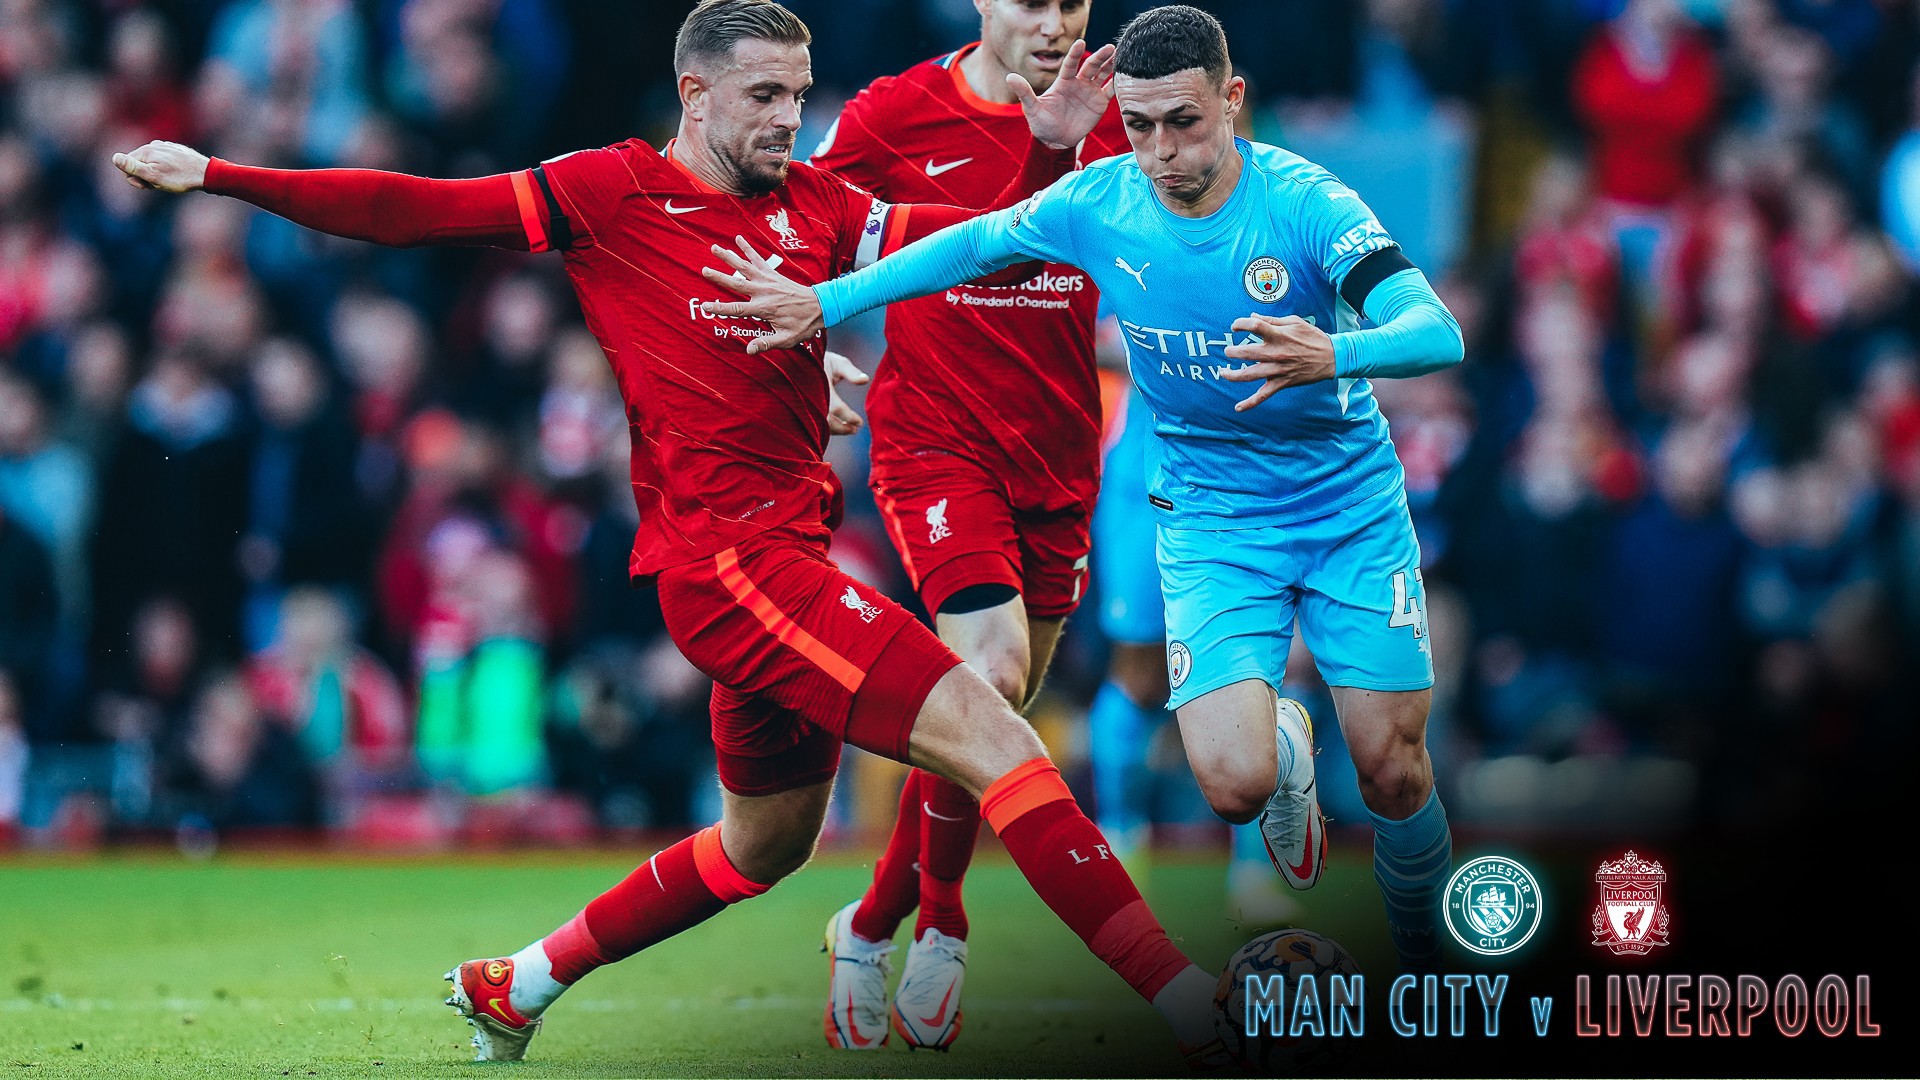 City v Liverpool Premier League dominance in numbers